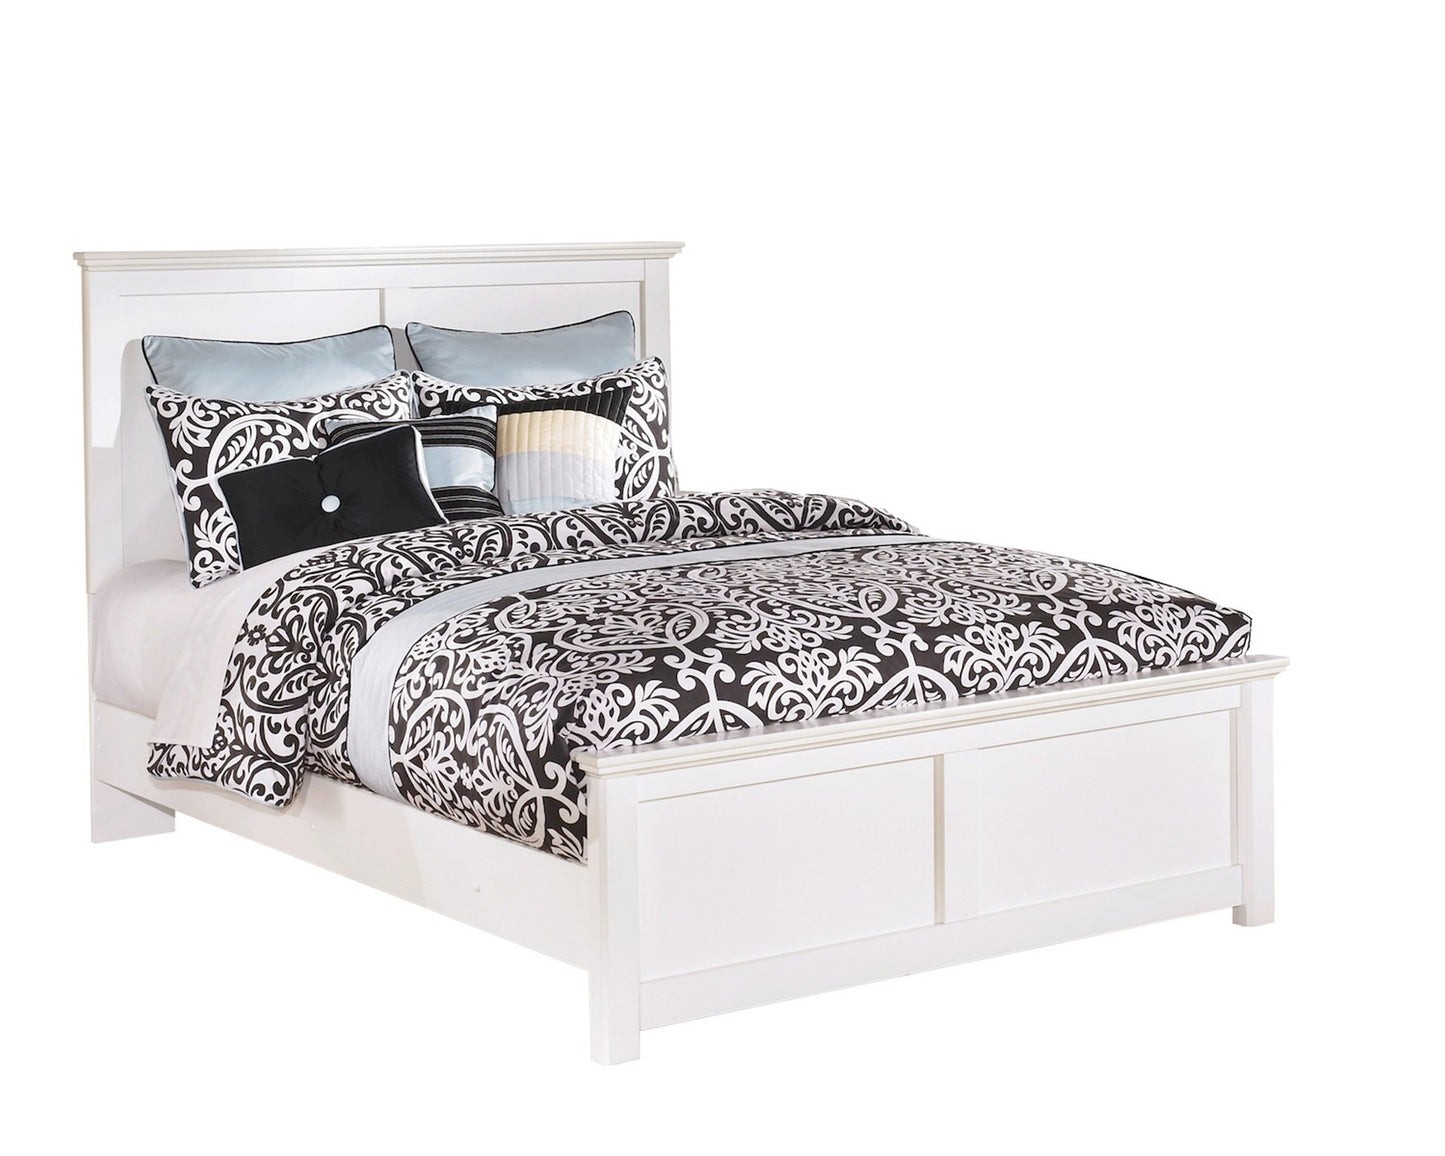 Ashley Bostwick Shoals 4 PC Queen Panel Bedroom Set in White - The Furniture Space.